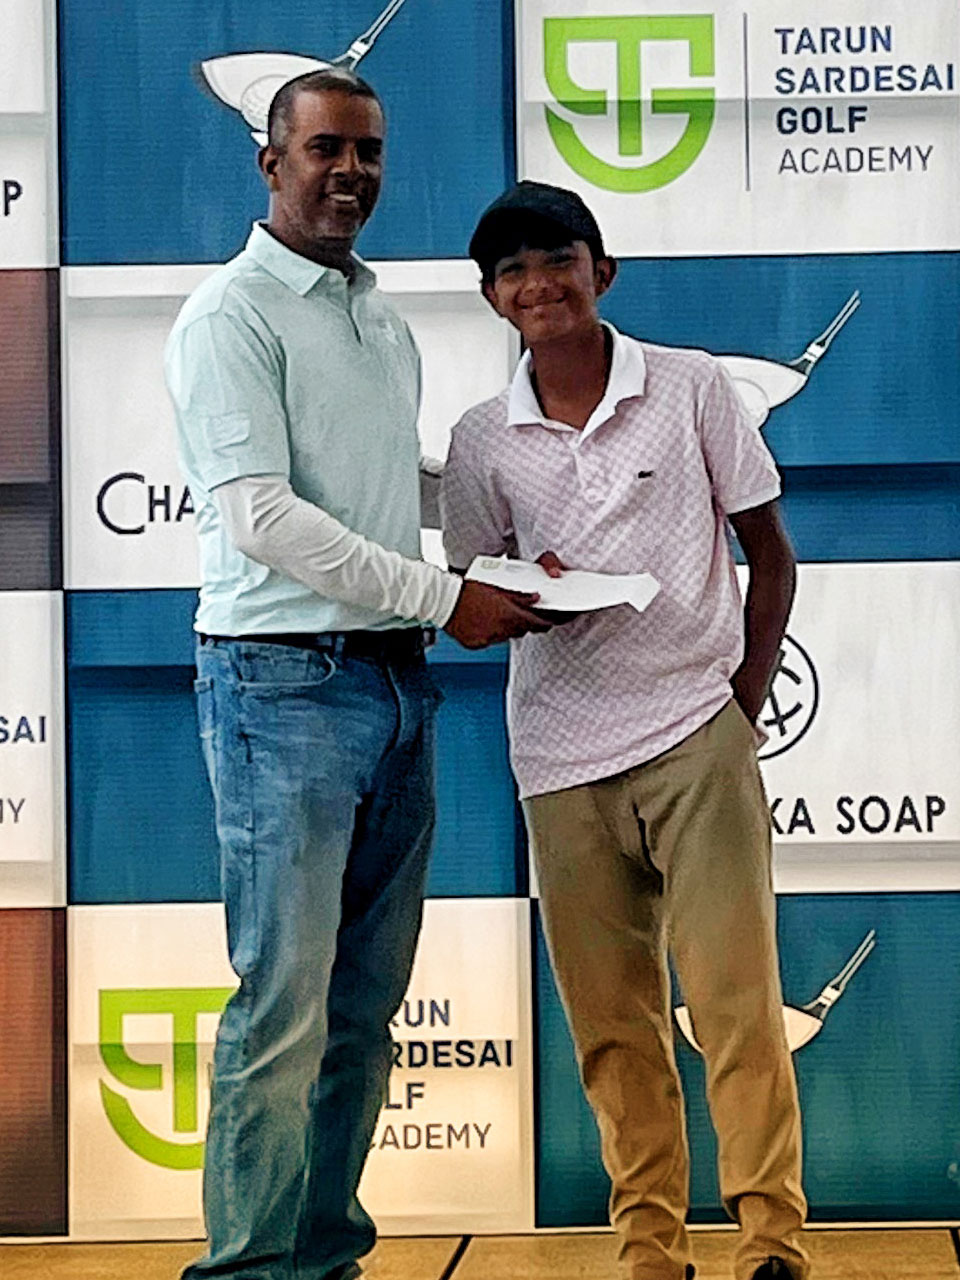 Jaitirth Warrier finished 3rd in the Junior Category